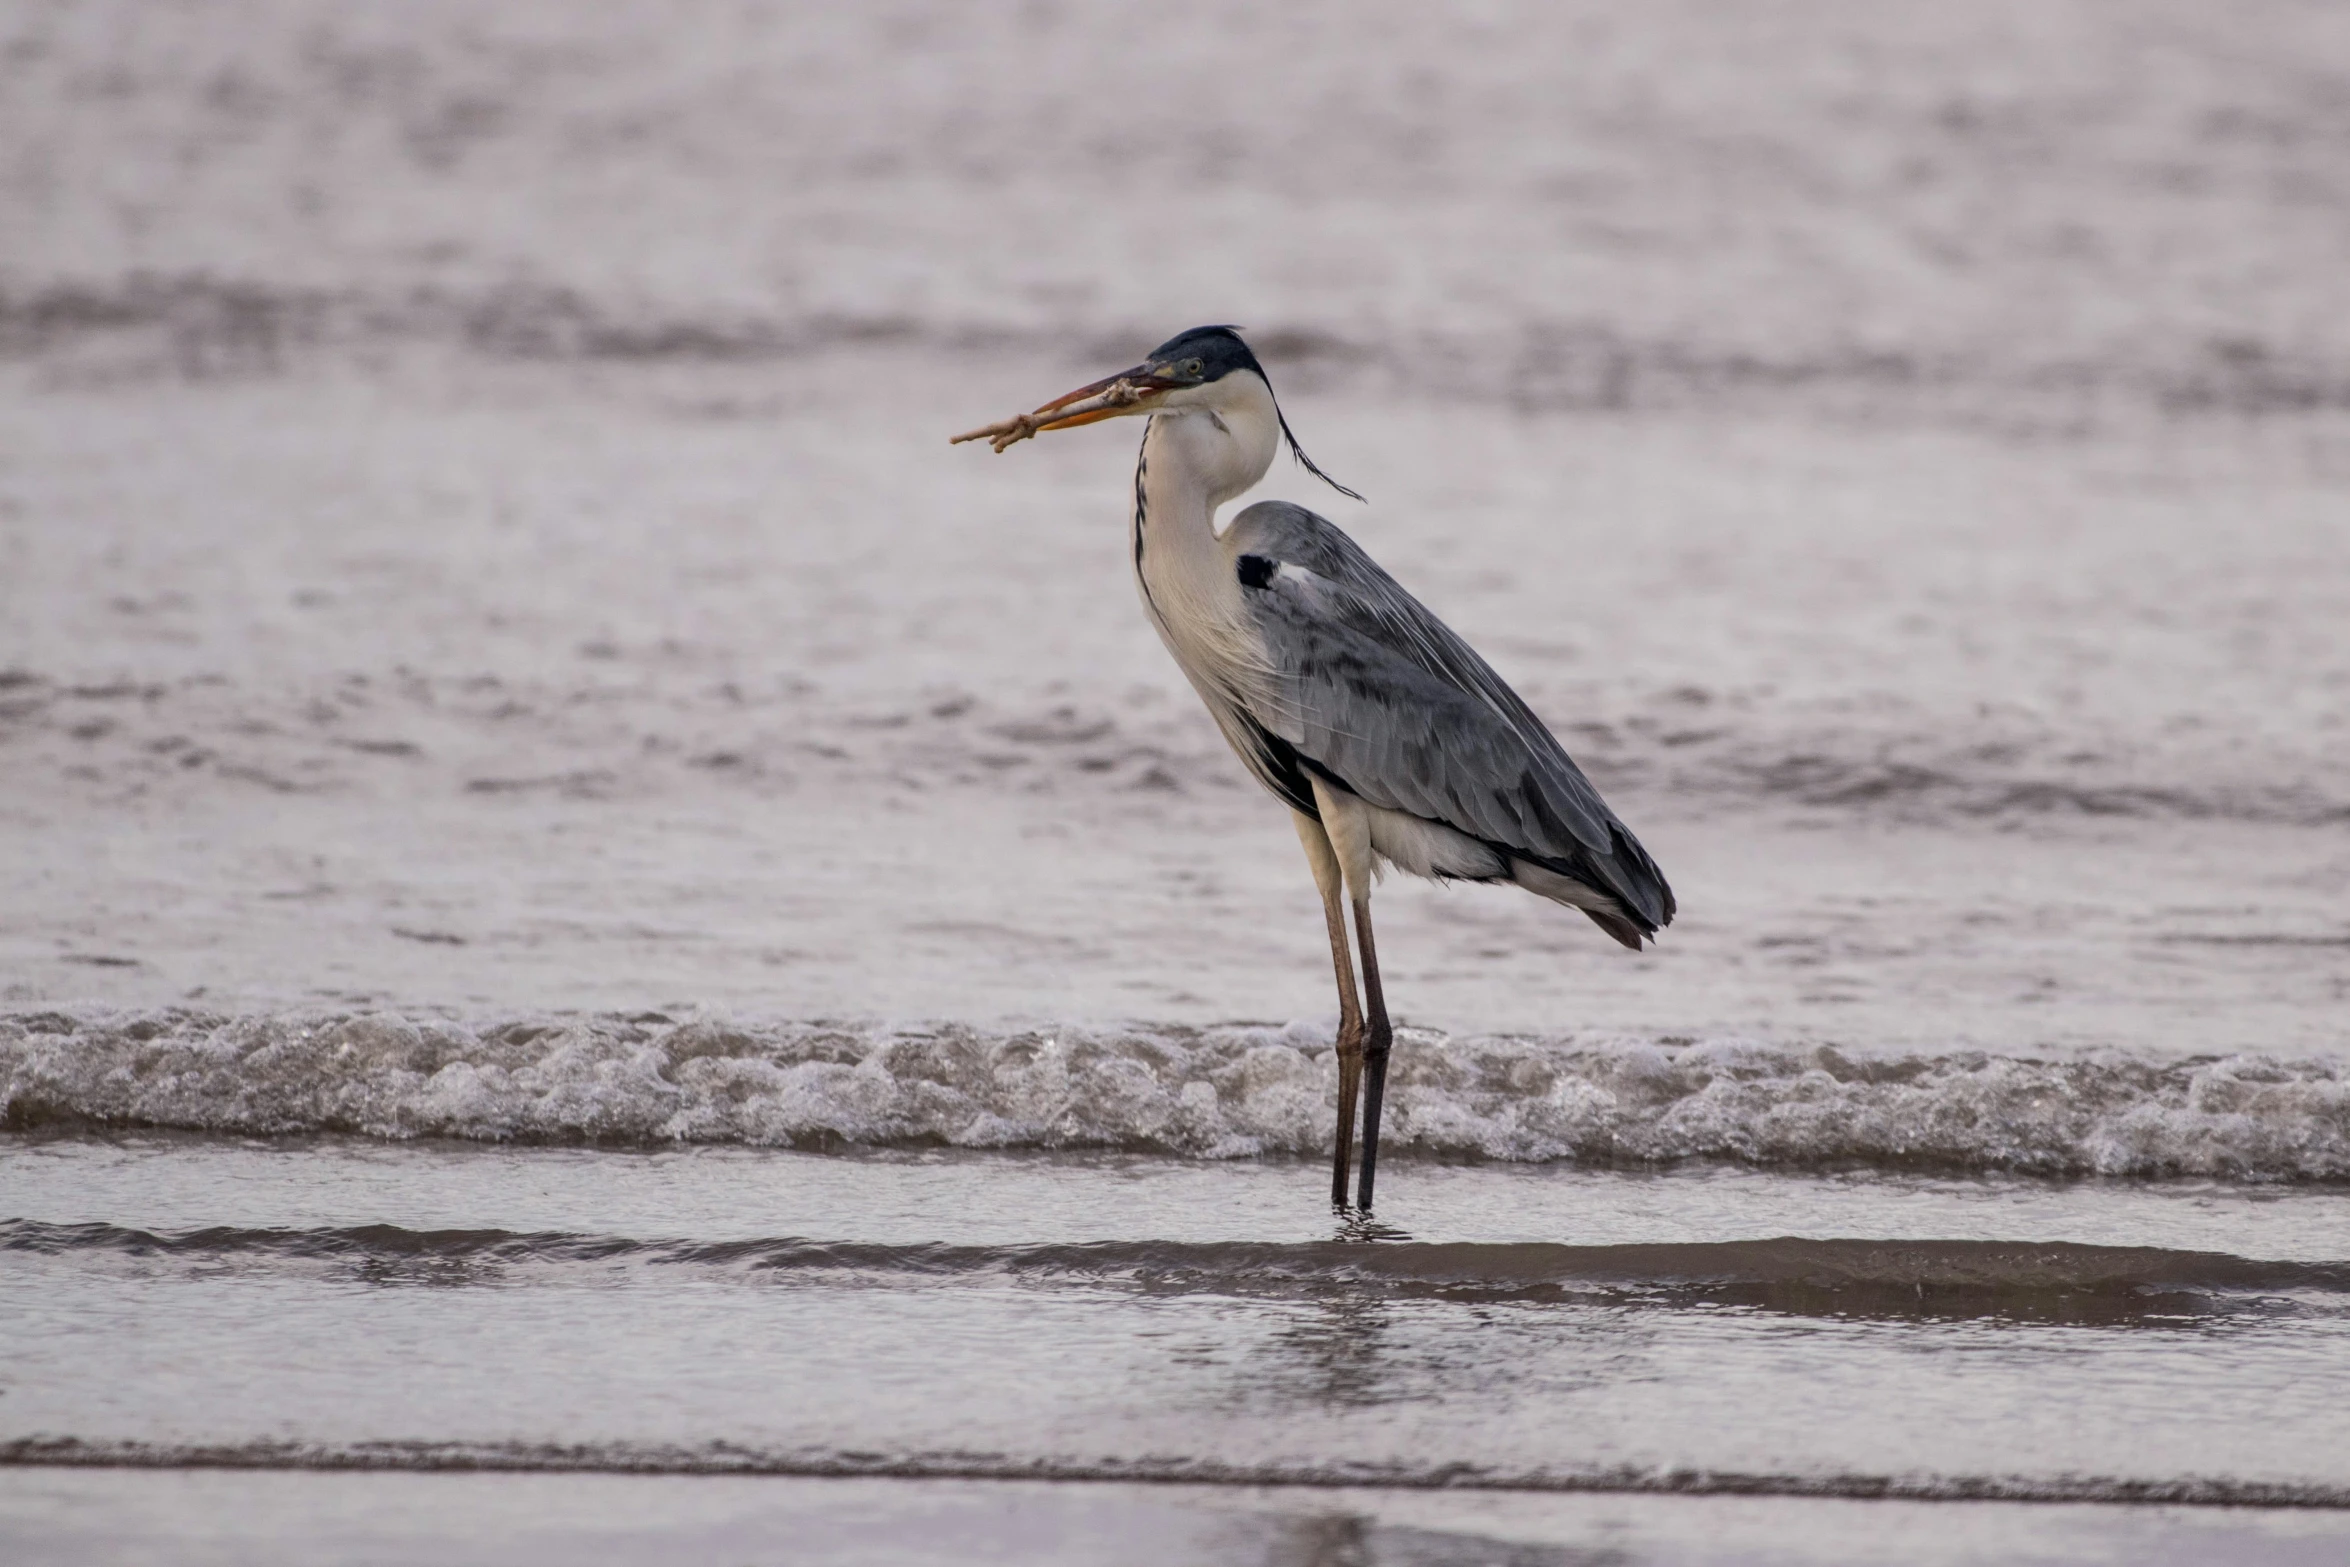 a bird standing in shallow water on the beach